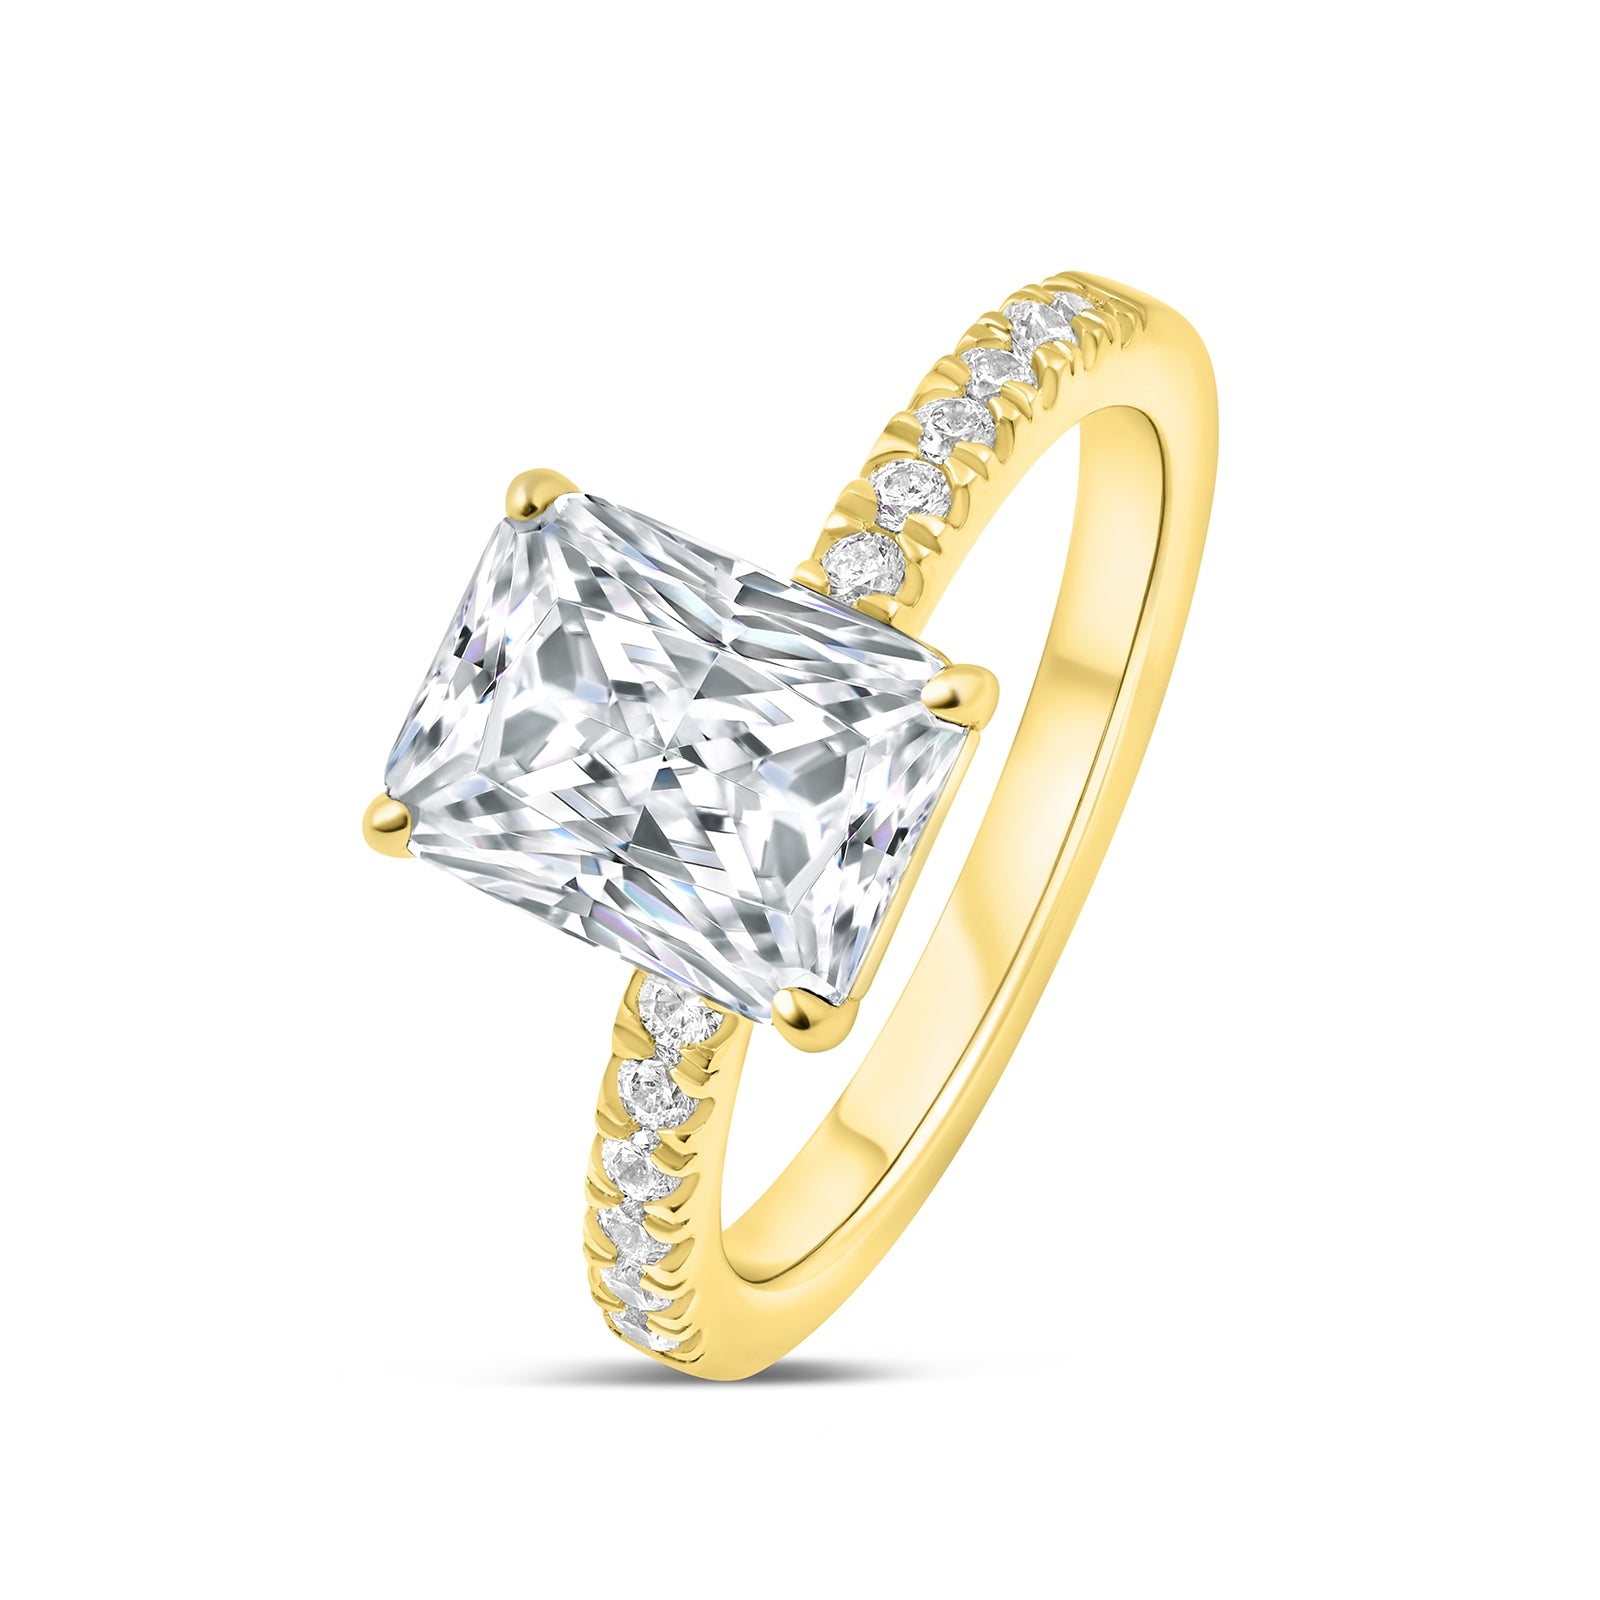 Classic 3 carat radiant cut engagement ring with half eternity band detailing tilted to its side